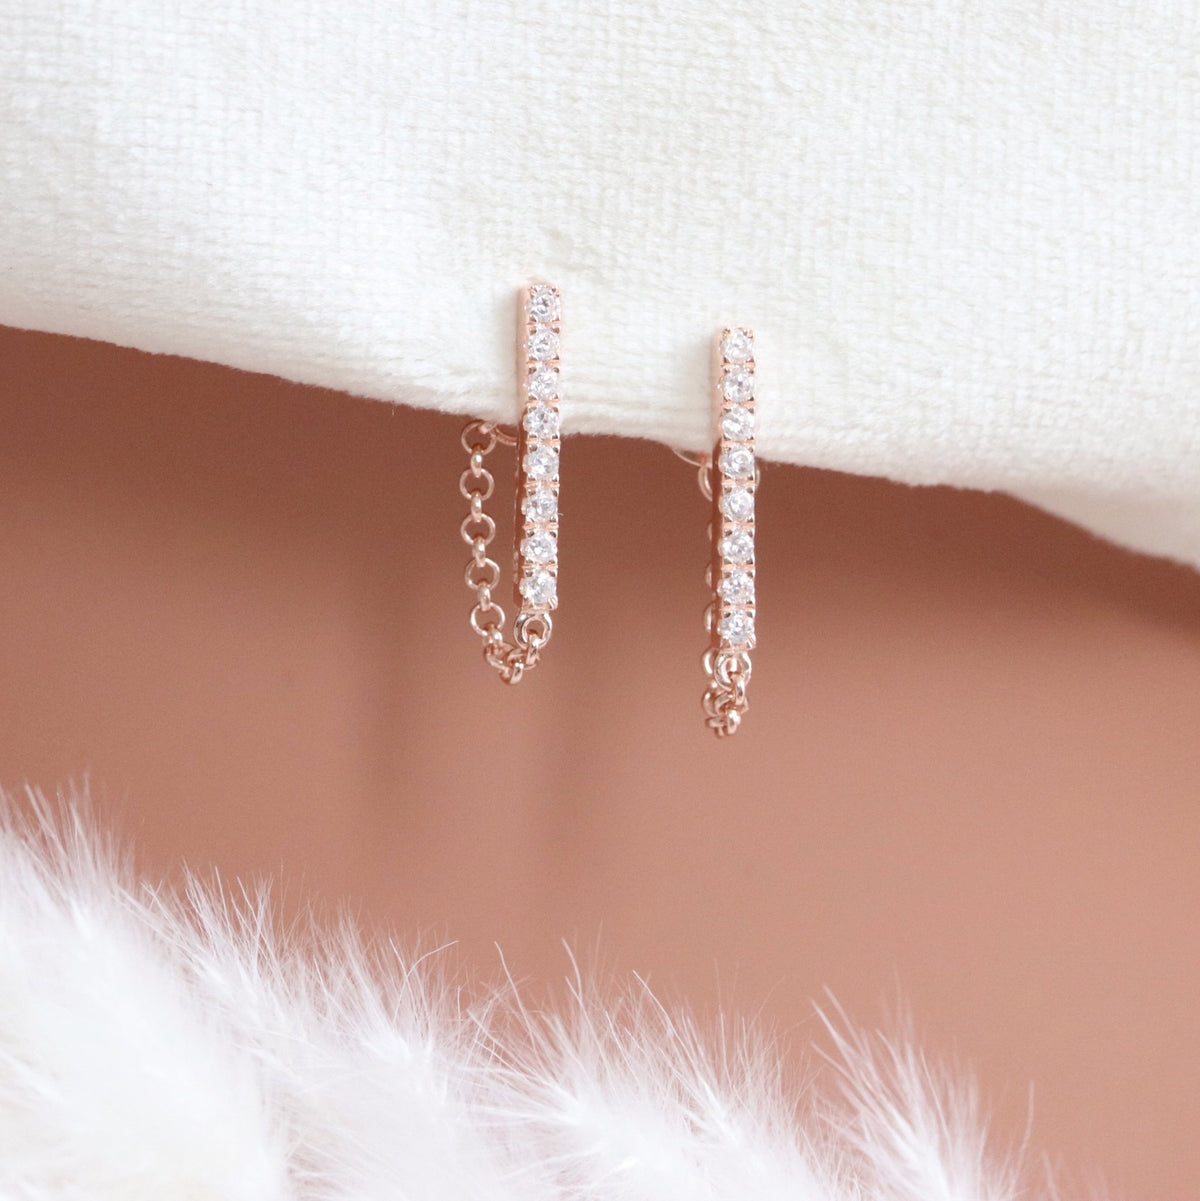 LOVE BAR CHAIN EARRINGS - CUBIC ZIRCONIA &amp; ROSE GOLD - SO PRETTY CARA COTTER